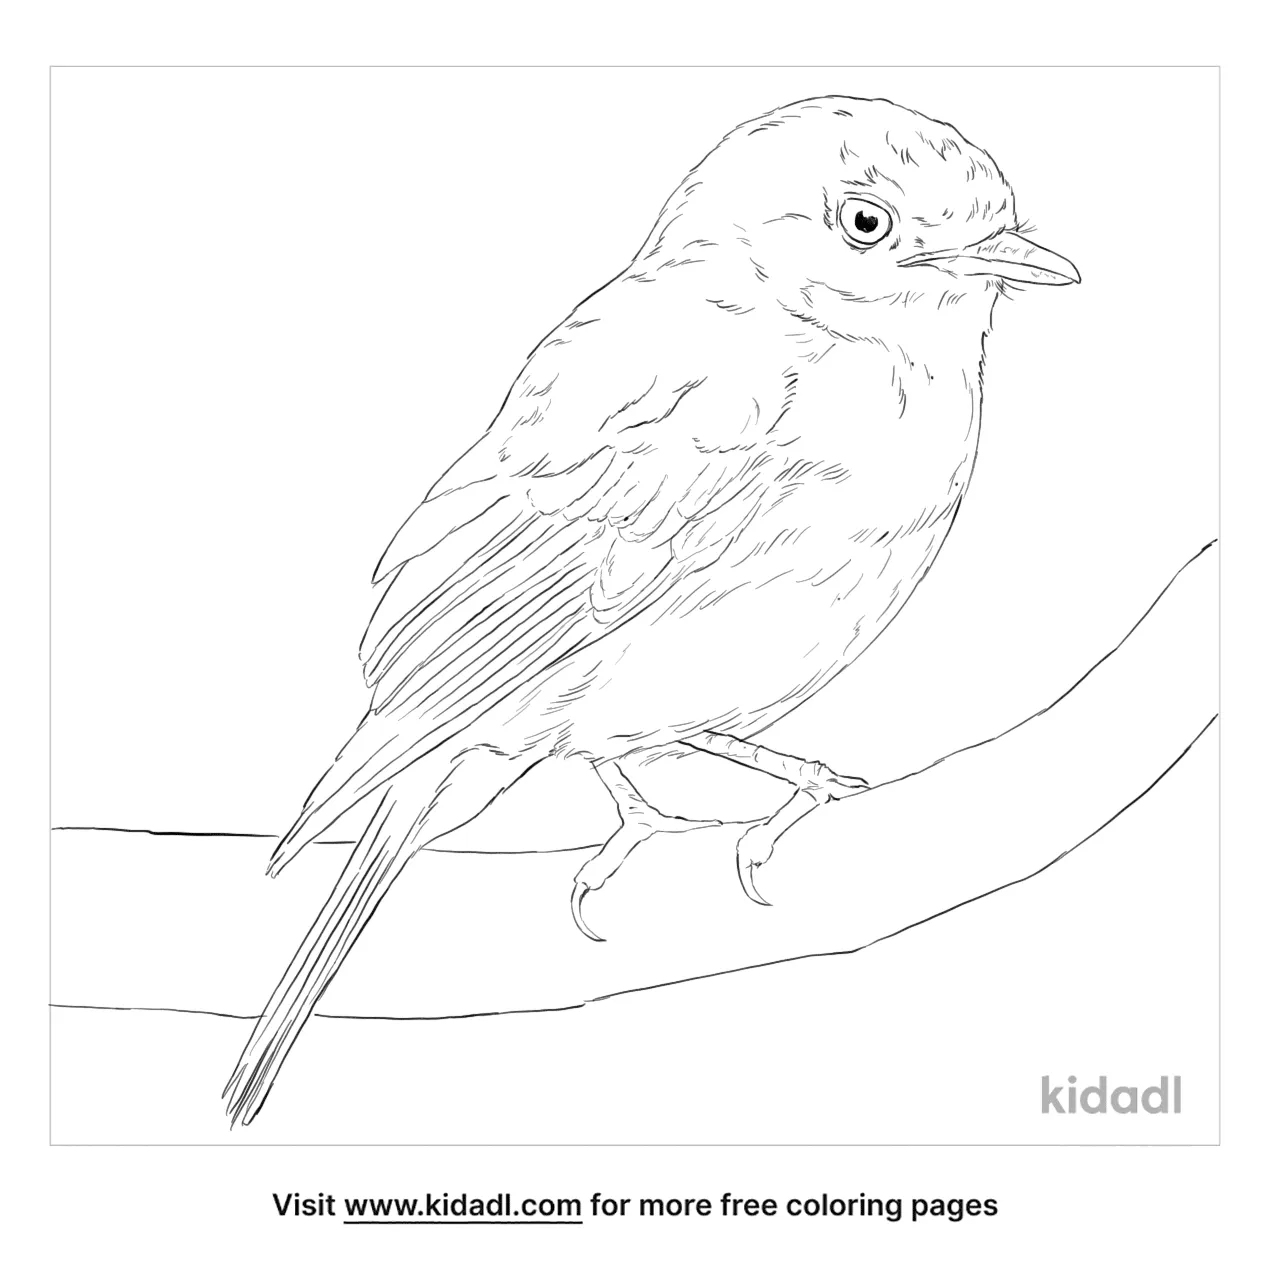 Free Western Yellow Robin Coloring Page | Coloring Page Printables | Kidadl